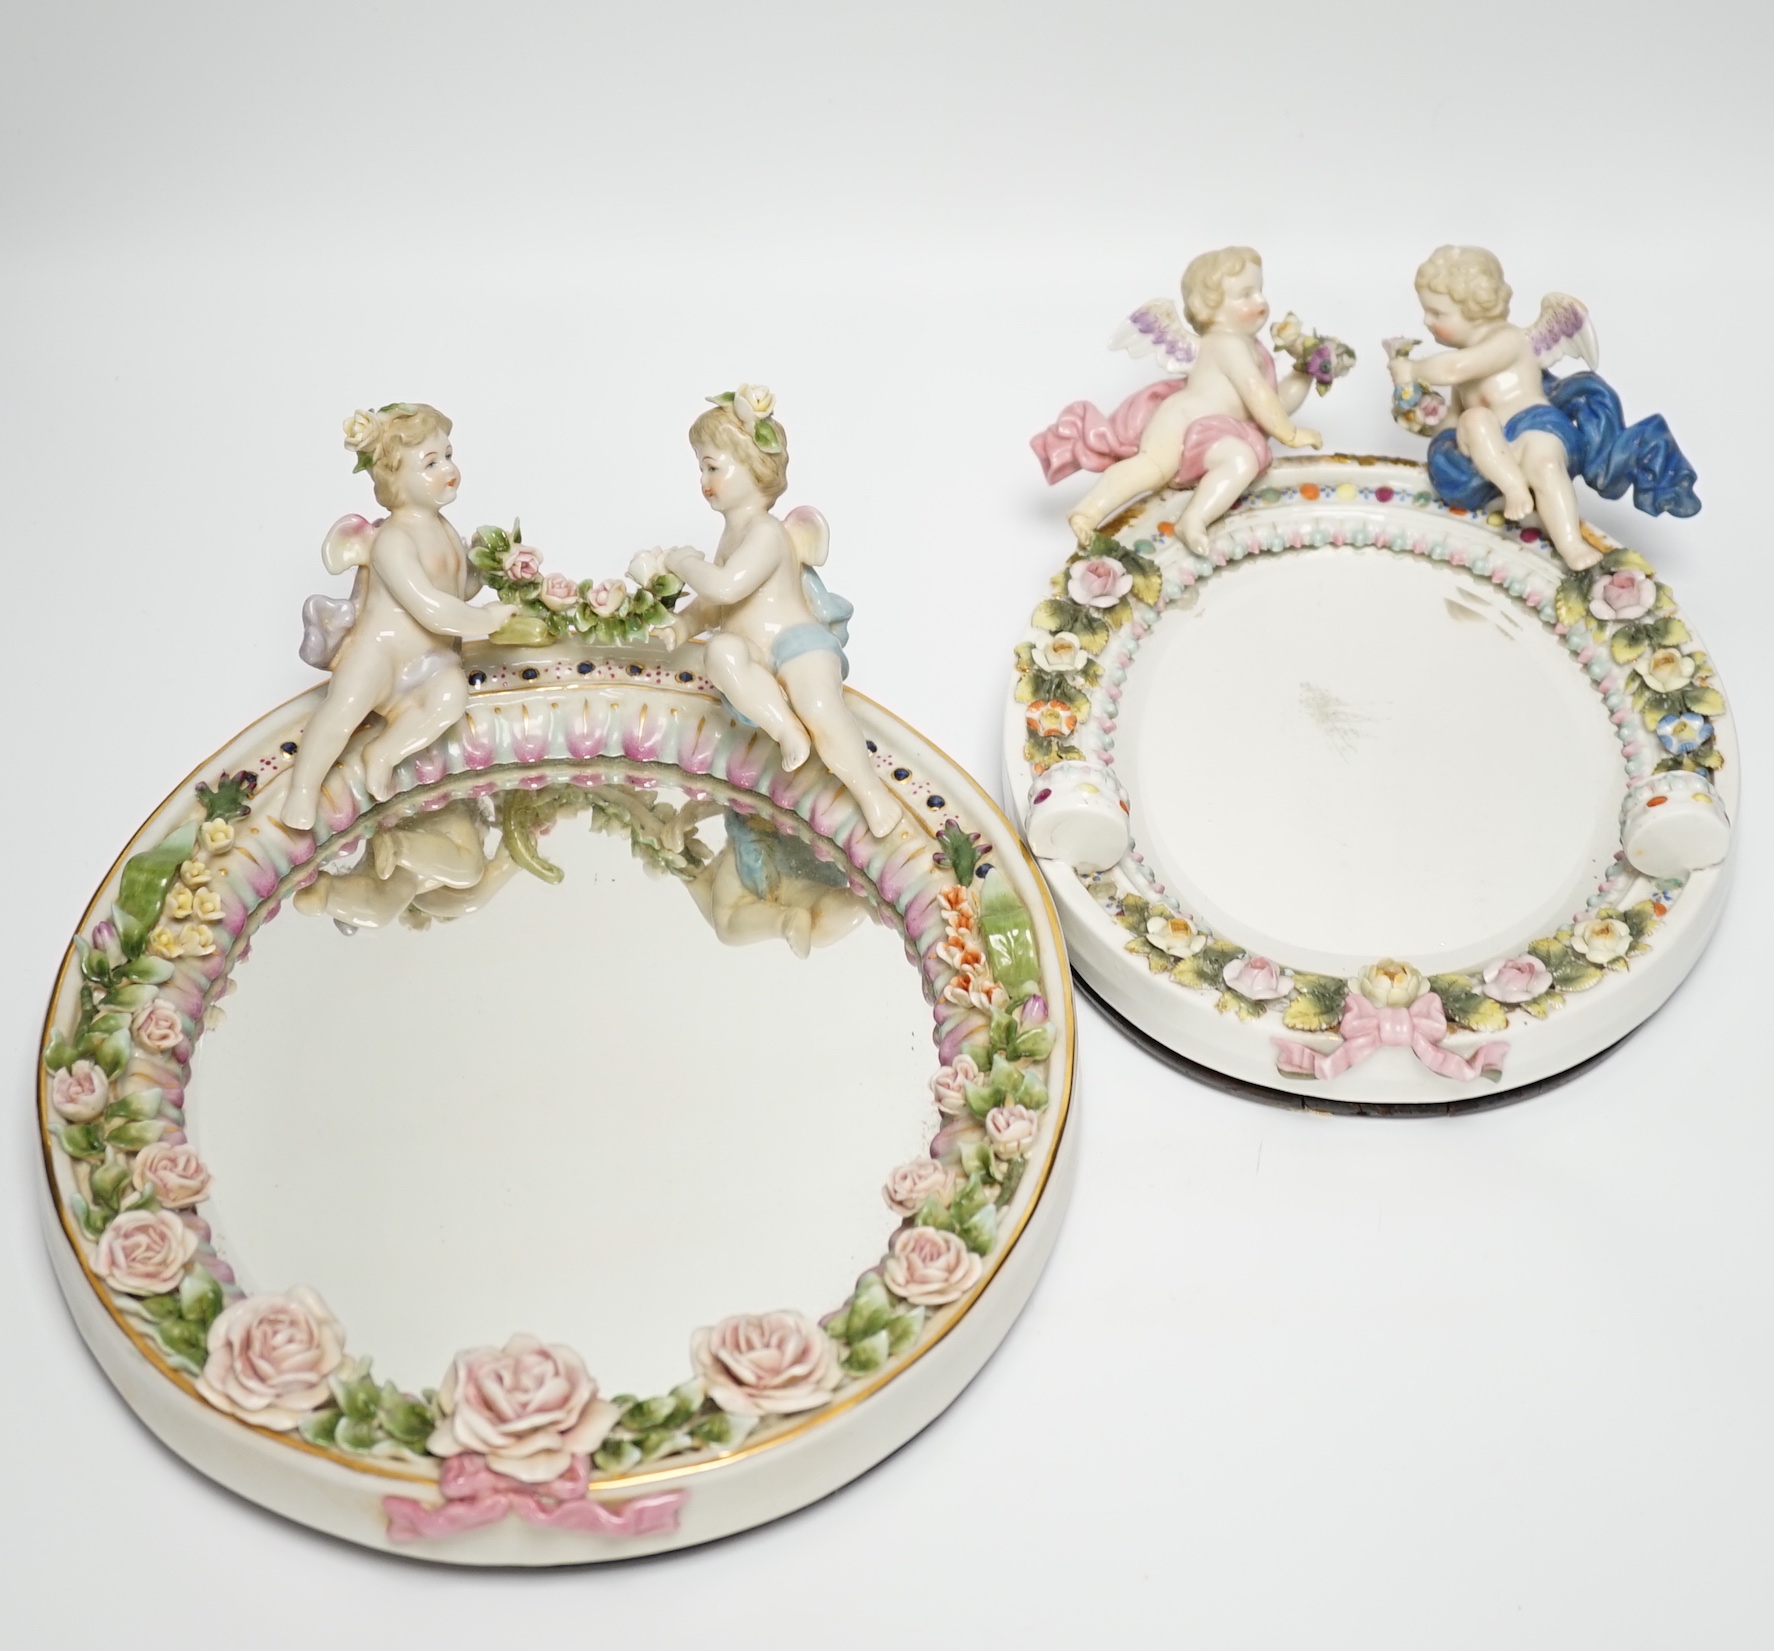 Two late 19th century German oval porcelain oval figurative mirrors, 33cm high